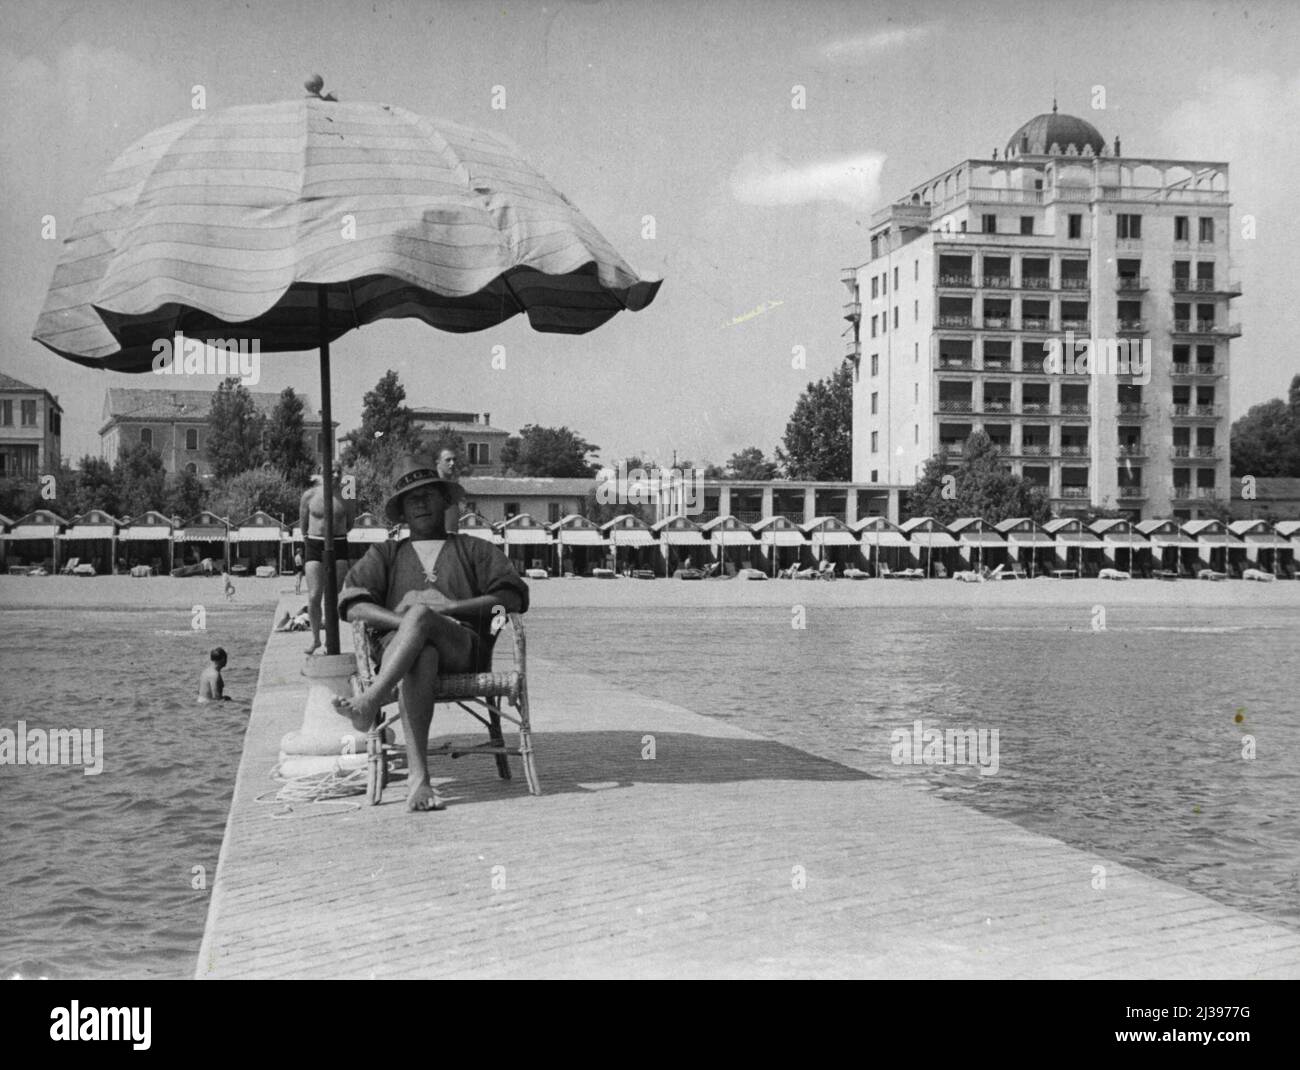 The Lido lifesaver, with the Excelsior Hotel in the background. October 22, 1951. Stock Photo